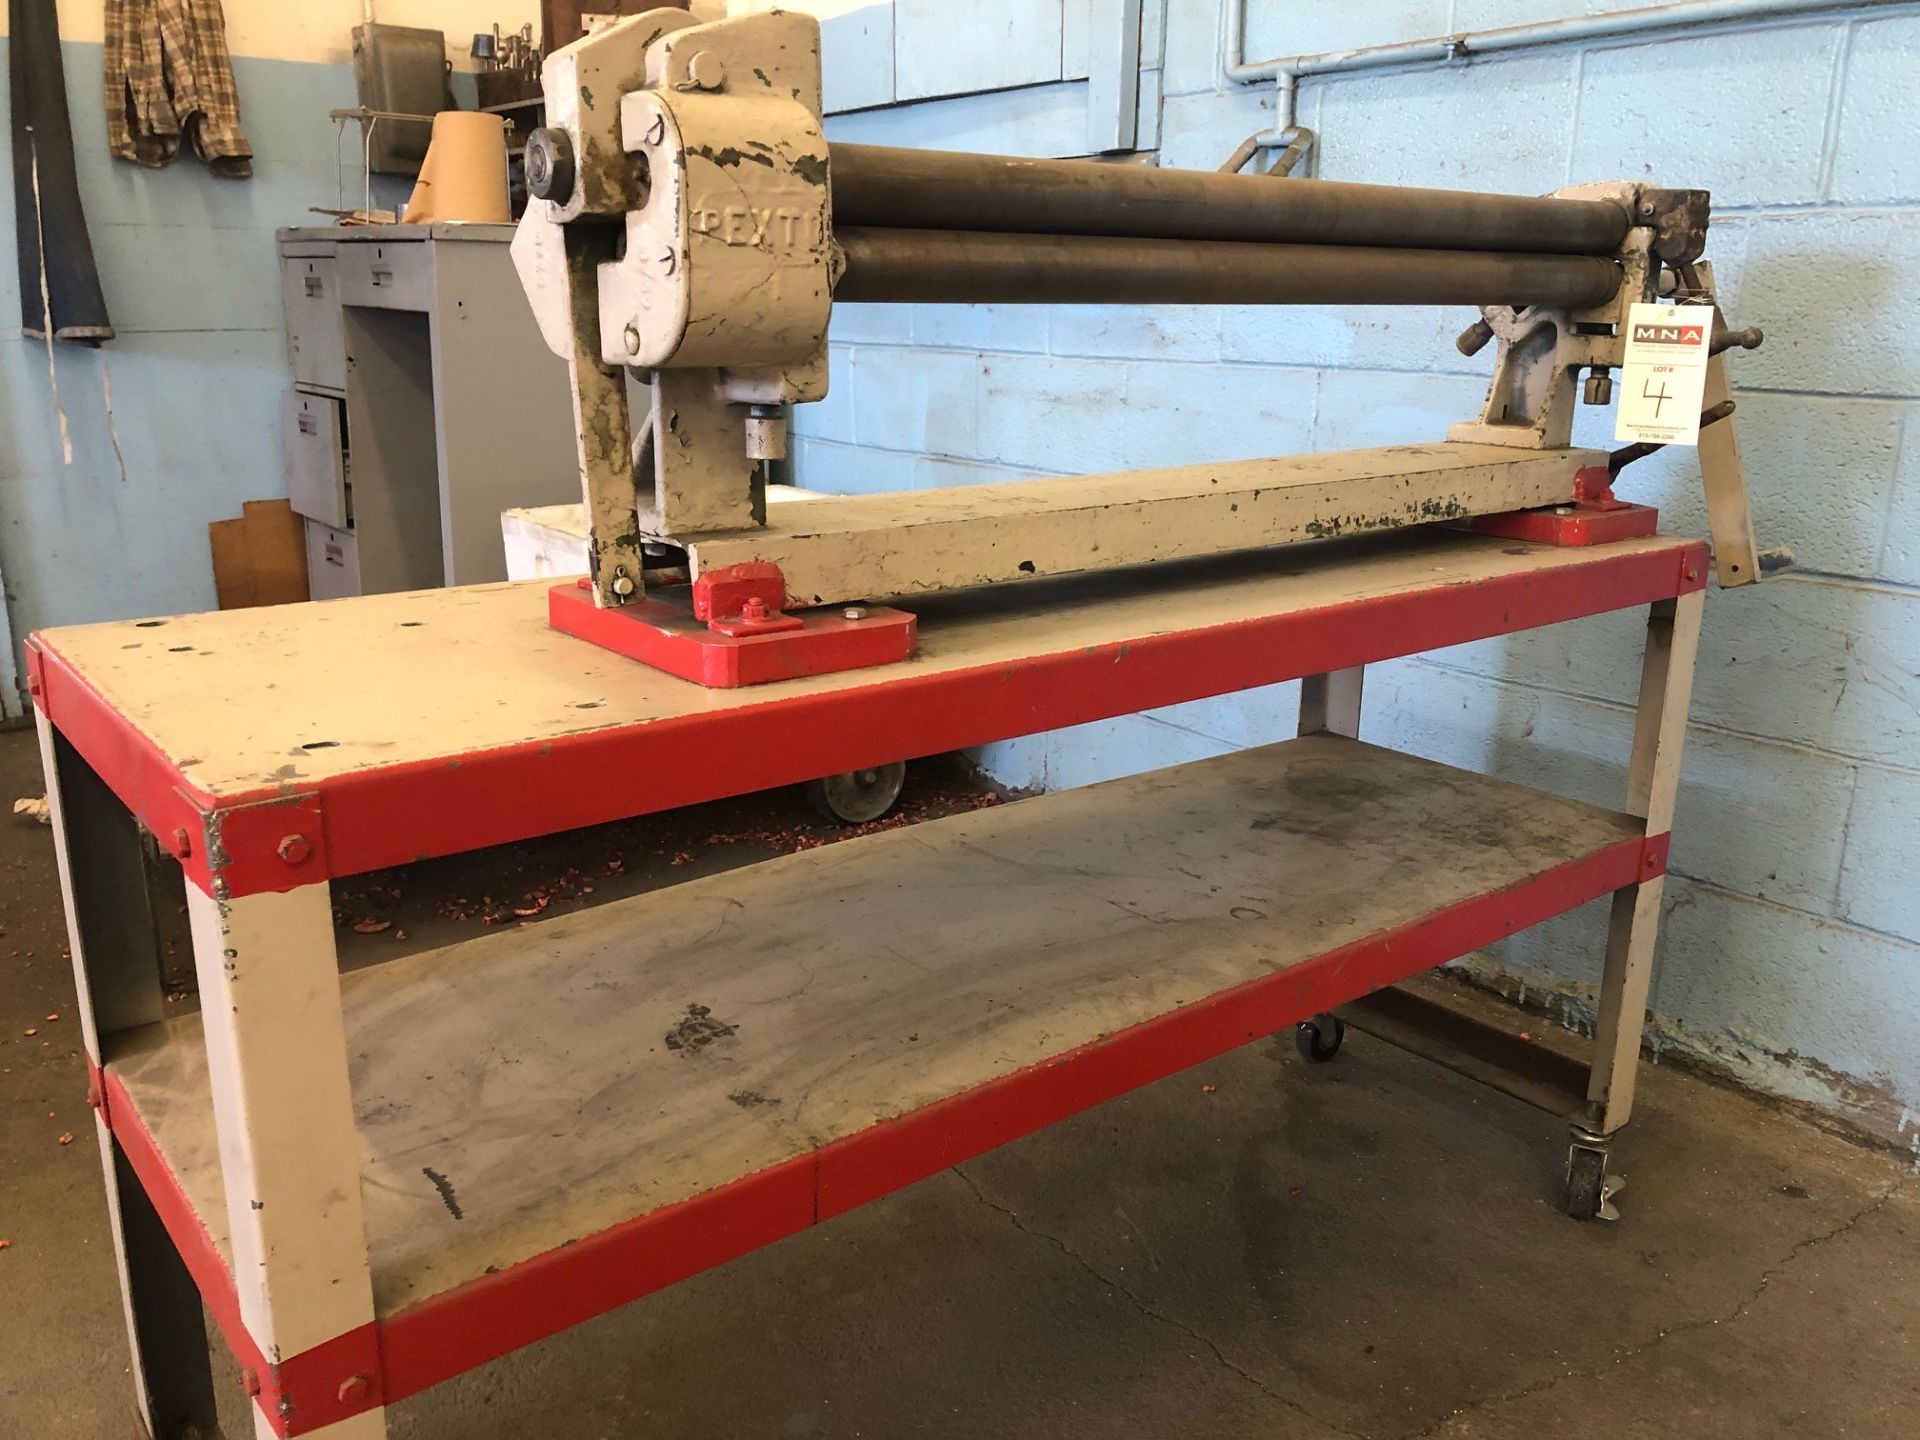 Pexto 30" Plate Bending Roll; 3-Roll, Initial Pinch Type